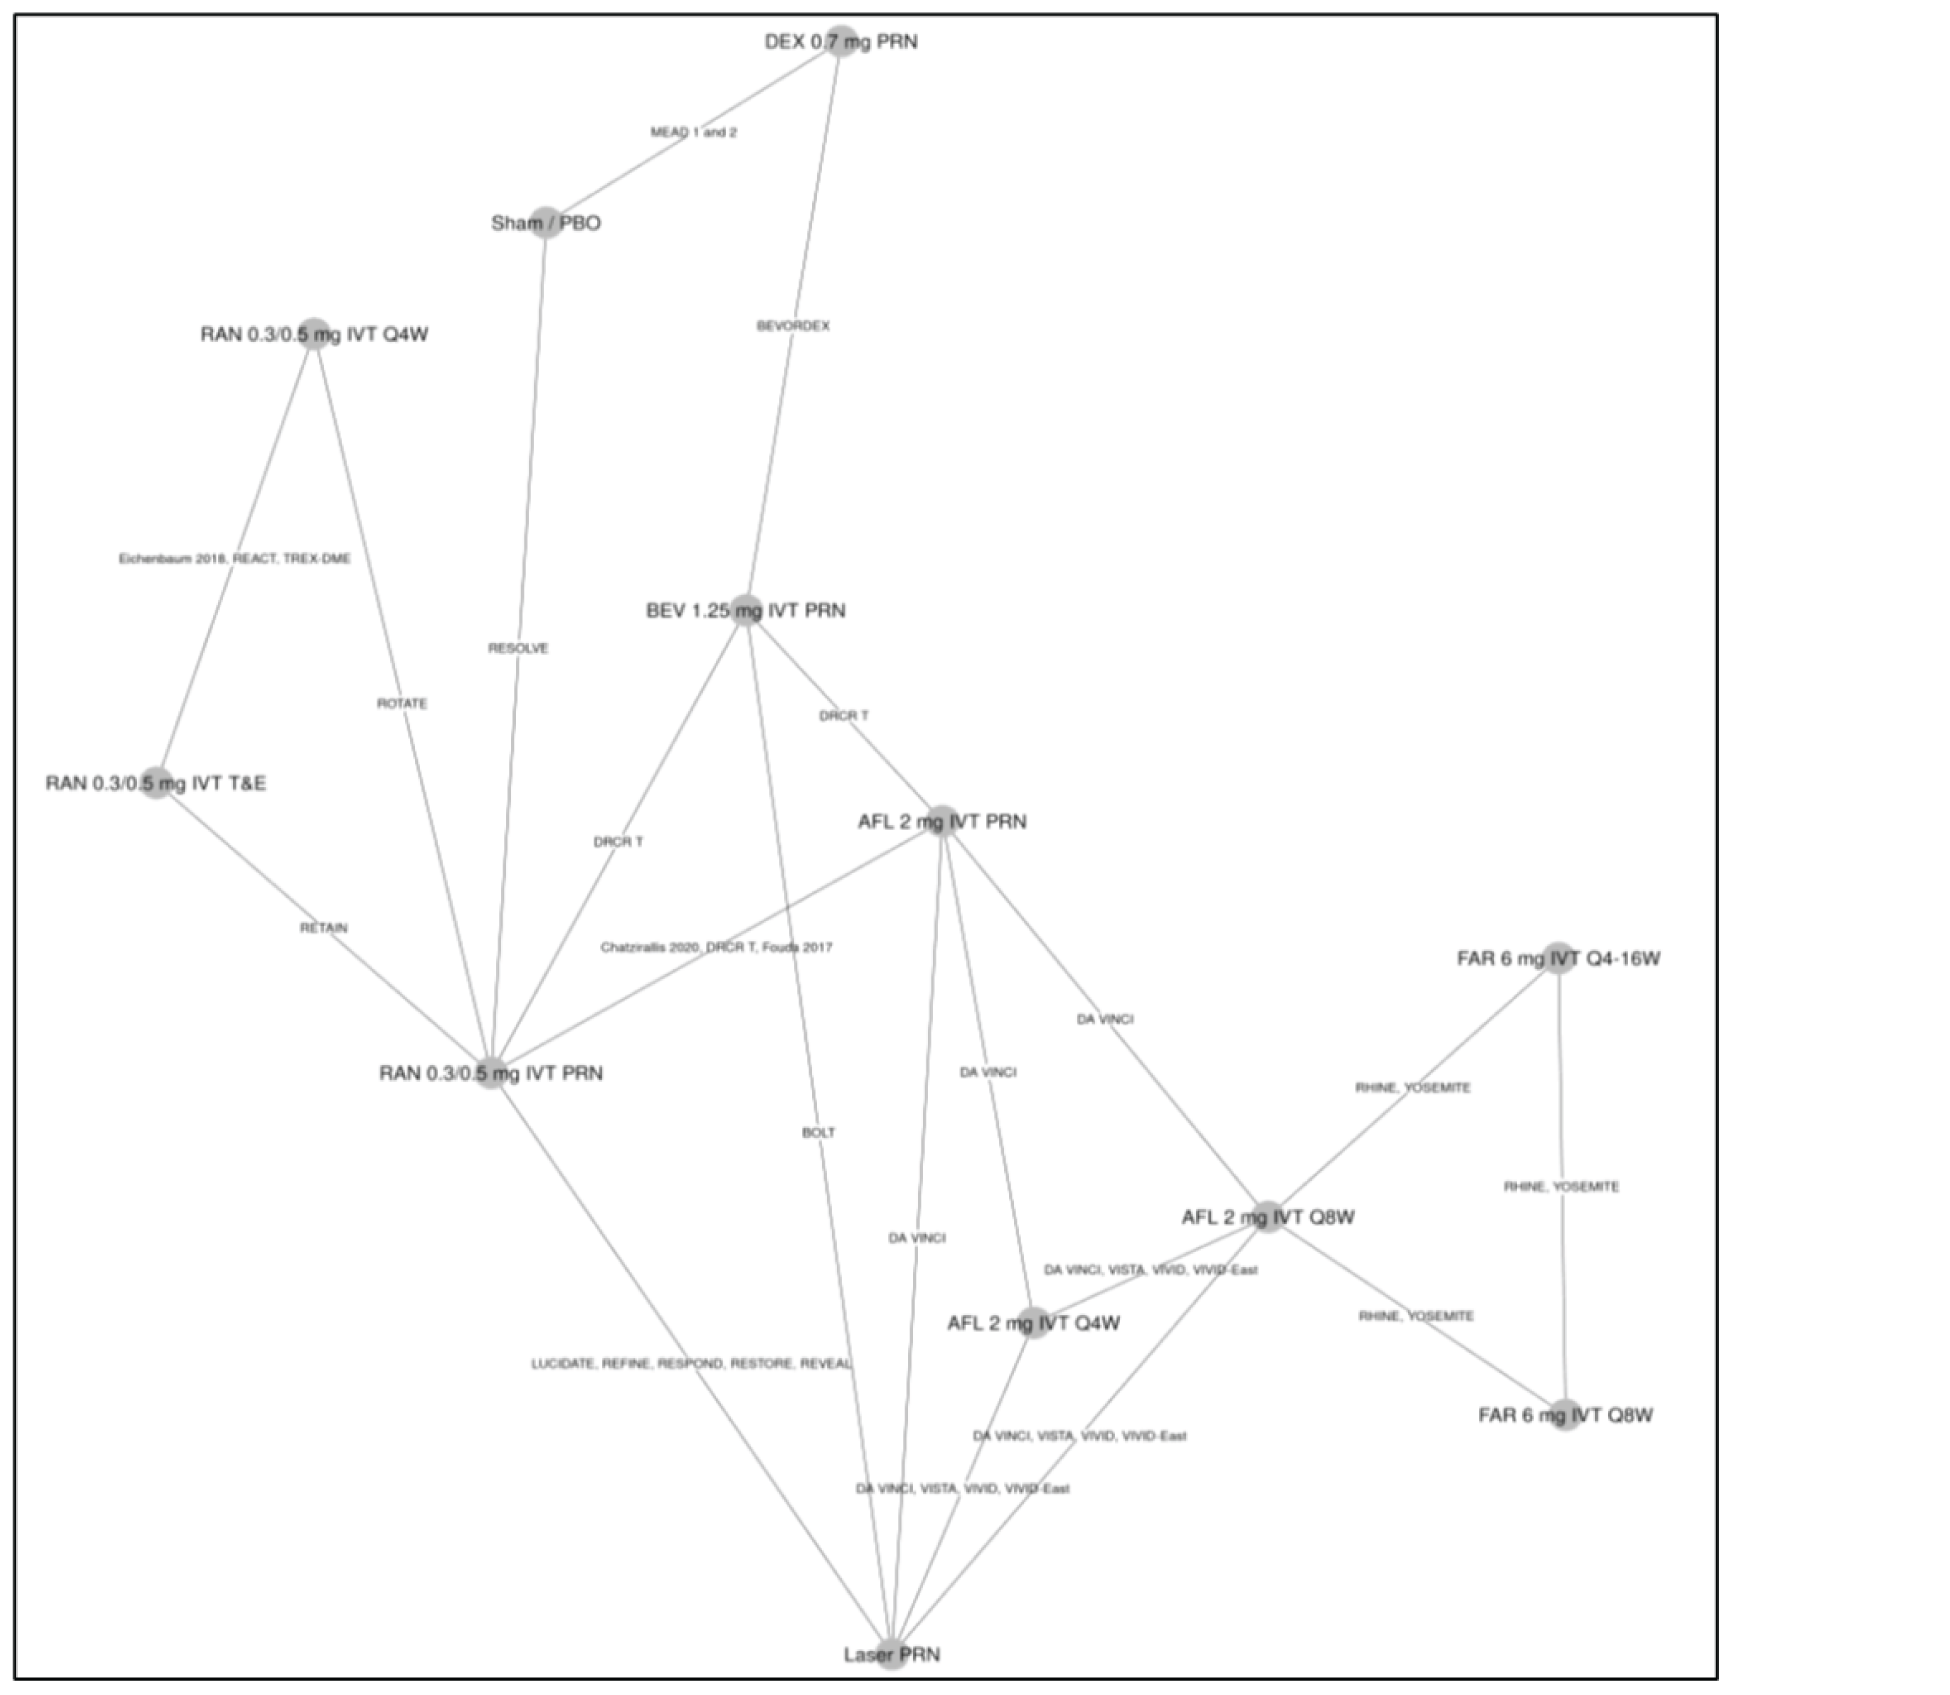 Twenty-three trials reported on the mean change in retinal thickness at 12 months and were connected in a network. There are 3 connected star diagrams with 5 or more connections: ranibizumab 0.3 mg/0.5 mg IVT PRN; aflibercept 2 mg IVT PRN; and aflibercept 2 mg IVT q.8.w. The most common connection was ranibizumab 0.3 mg/0.5 mg IVT PRN. Faricimab was connected to aflibercept through the RHINE and YOSEMITE trials.